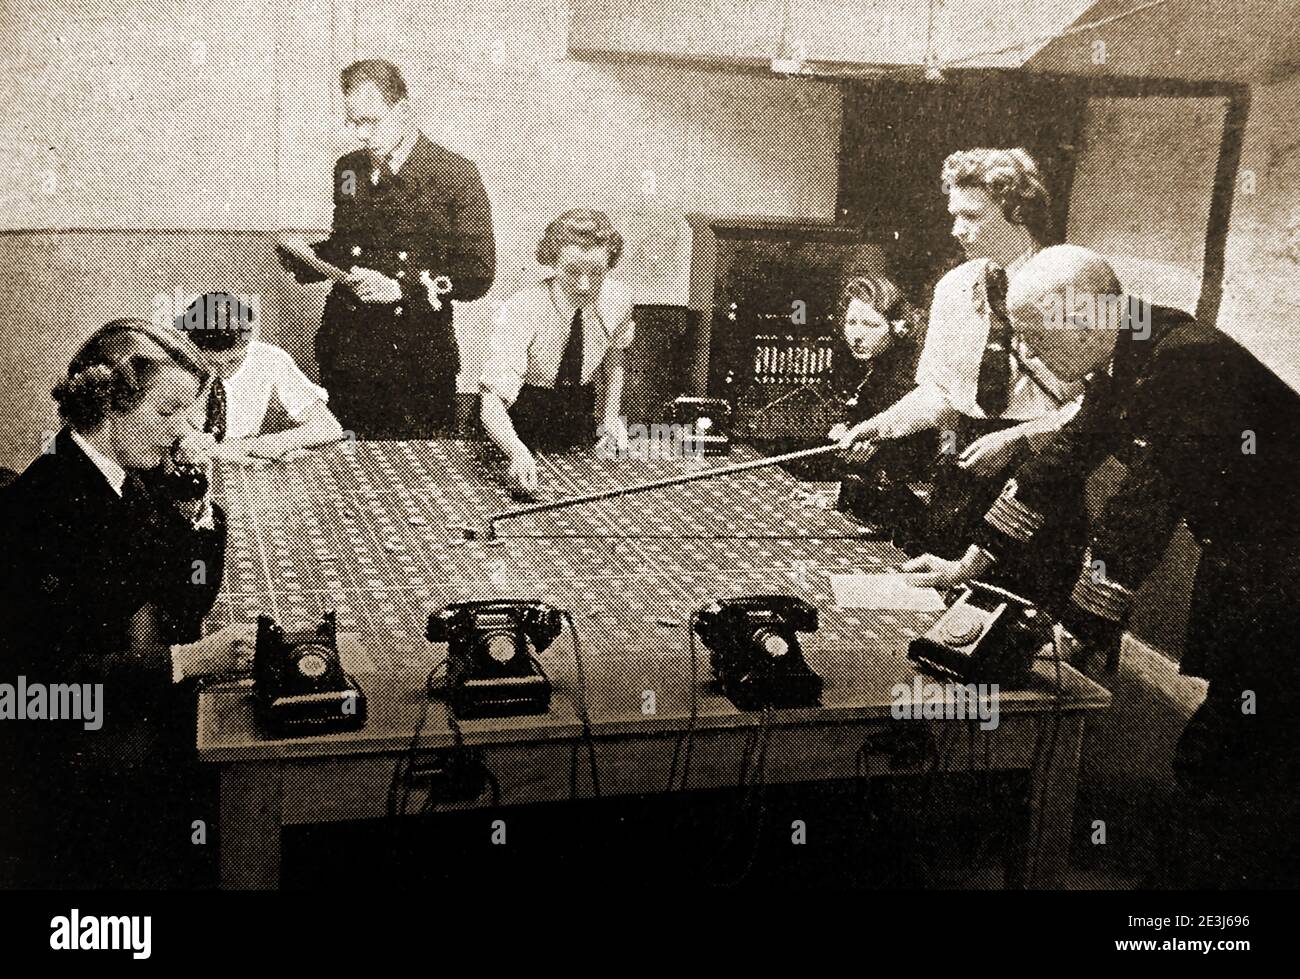 WWII - A printed photograph of British Wrens ( Women's Royal Naval Service), at work in a Naval operations room as plotters tracking the positions of various warships.First formed in 1917 for WWI, thendisbanded in 1919, only to be  revived in 1939 at the beginning of the Second World War. Integrated into the Royal Navy in 1993.  In 1939, Vera Laughton Mathews was appointed as the director of the re-formed WRNS with Ethel (Angela) Goodenough as her deputy Stock Photo